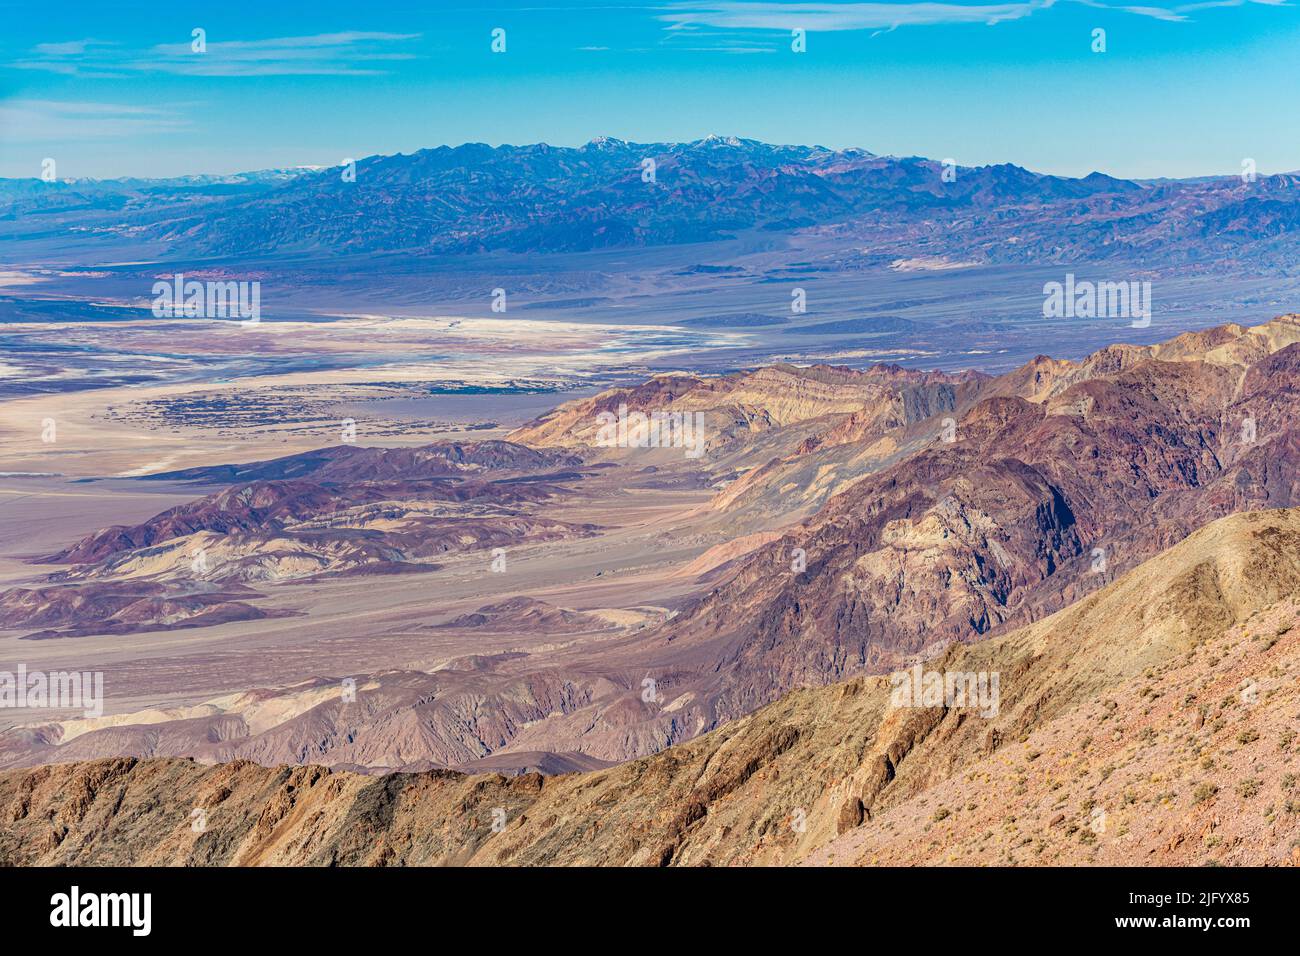 View over Death Valley, California, United States of America, North America Stock Photo